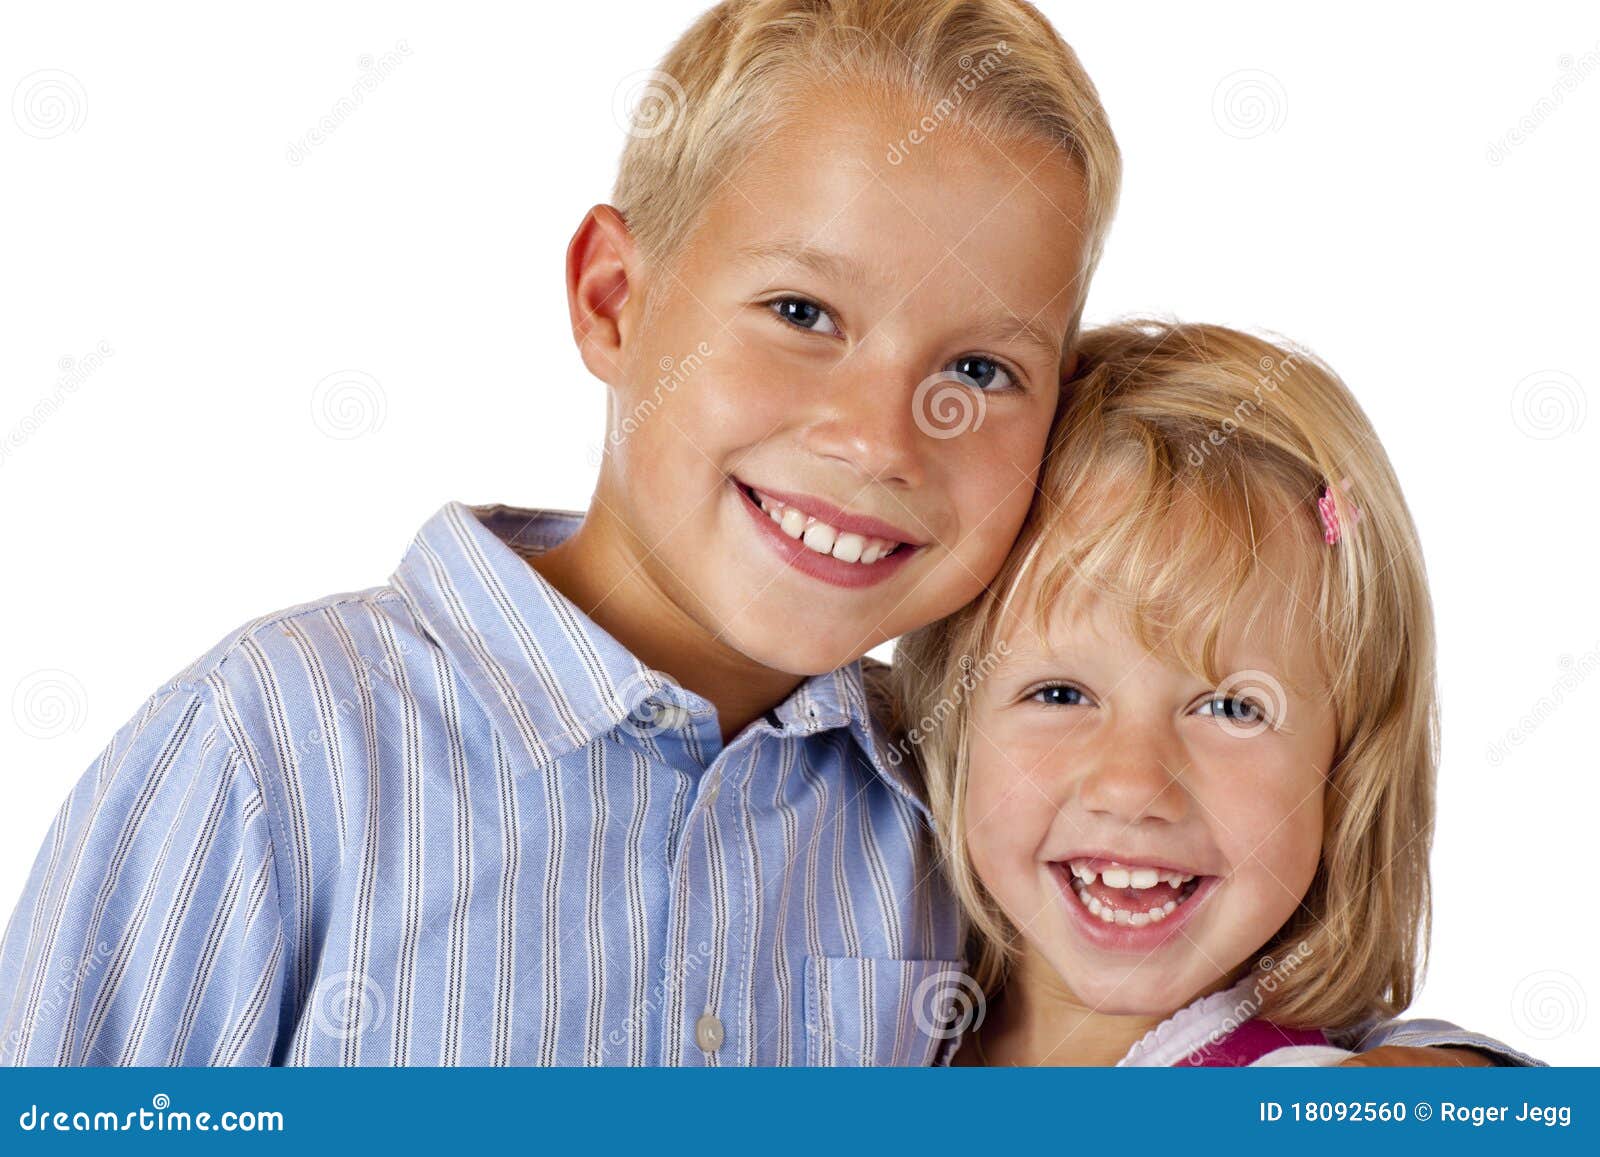 boy and girl are smiling happy into camera